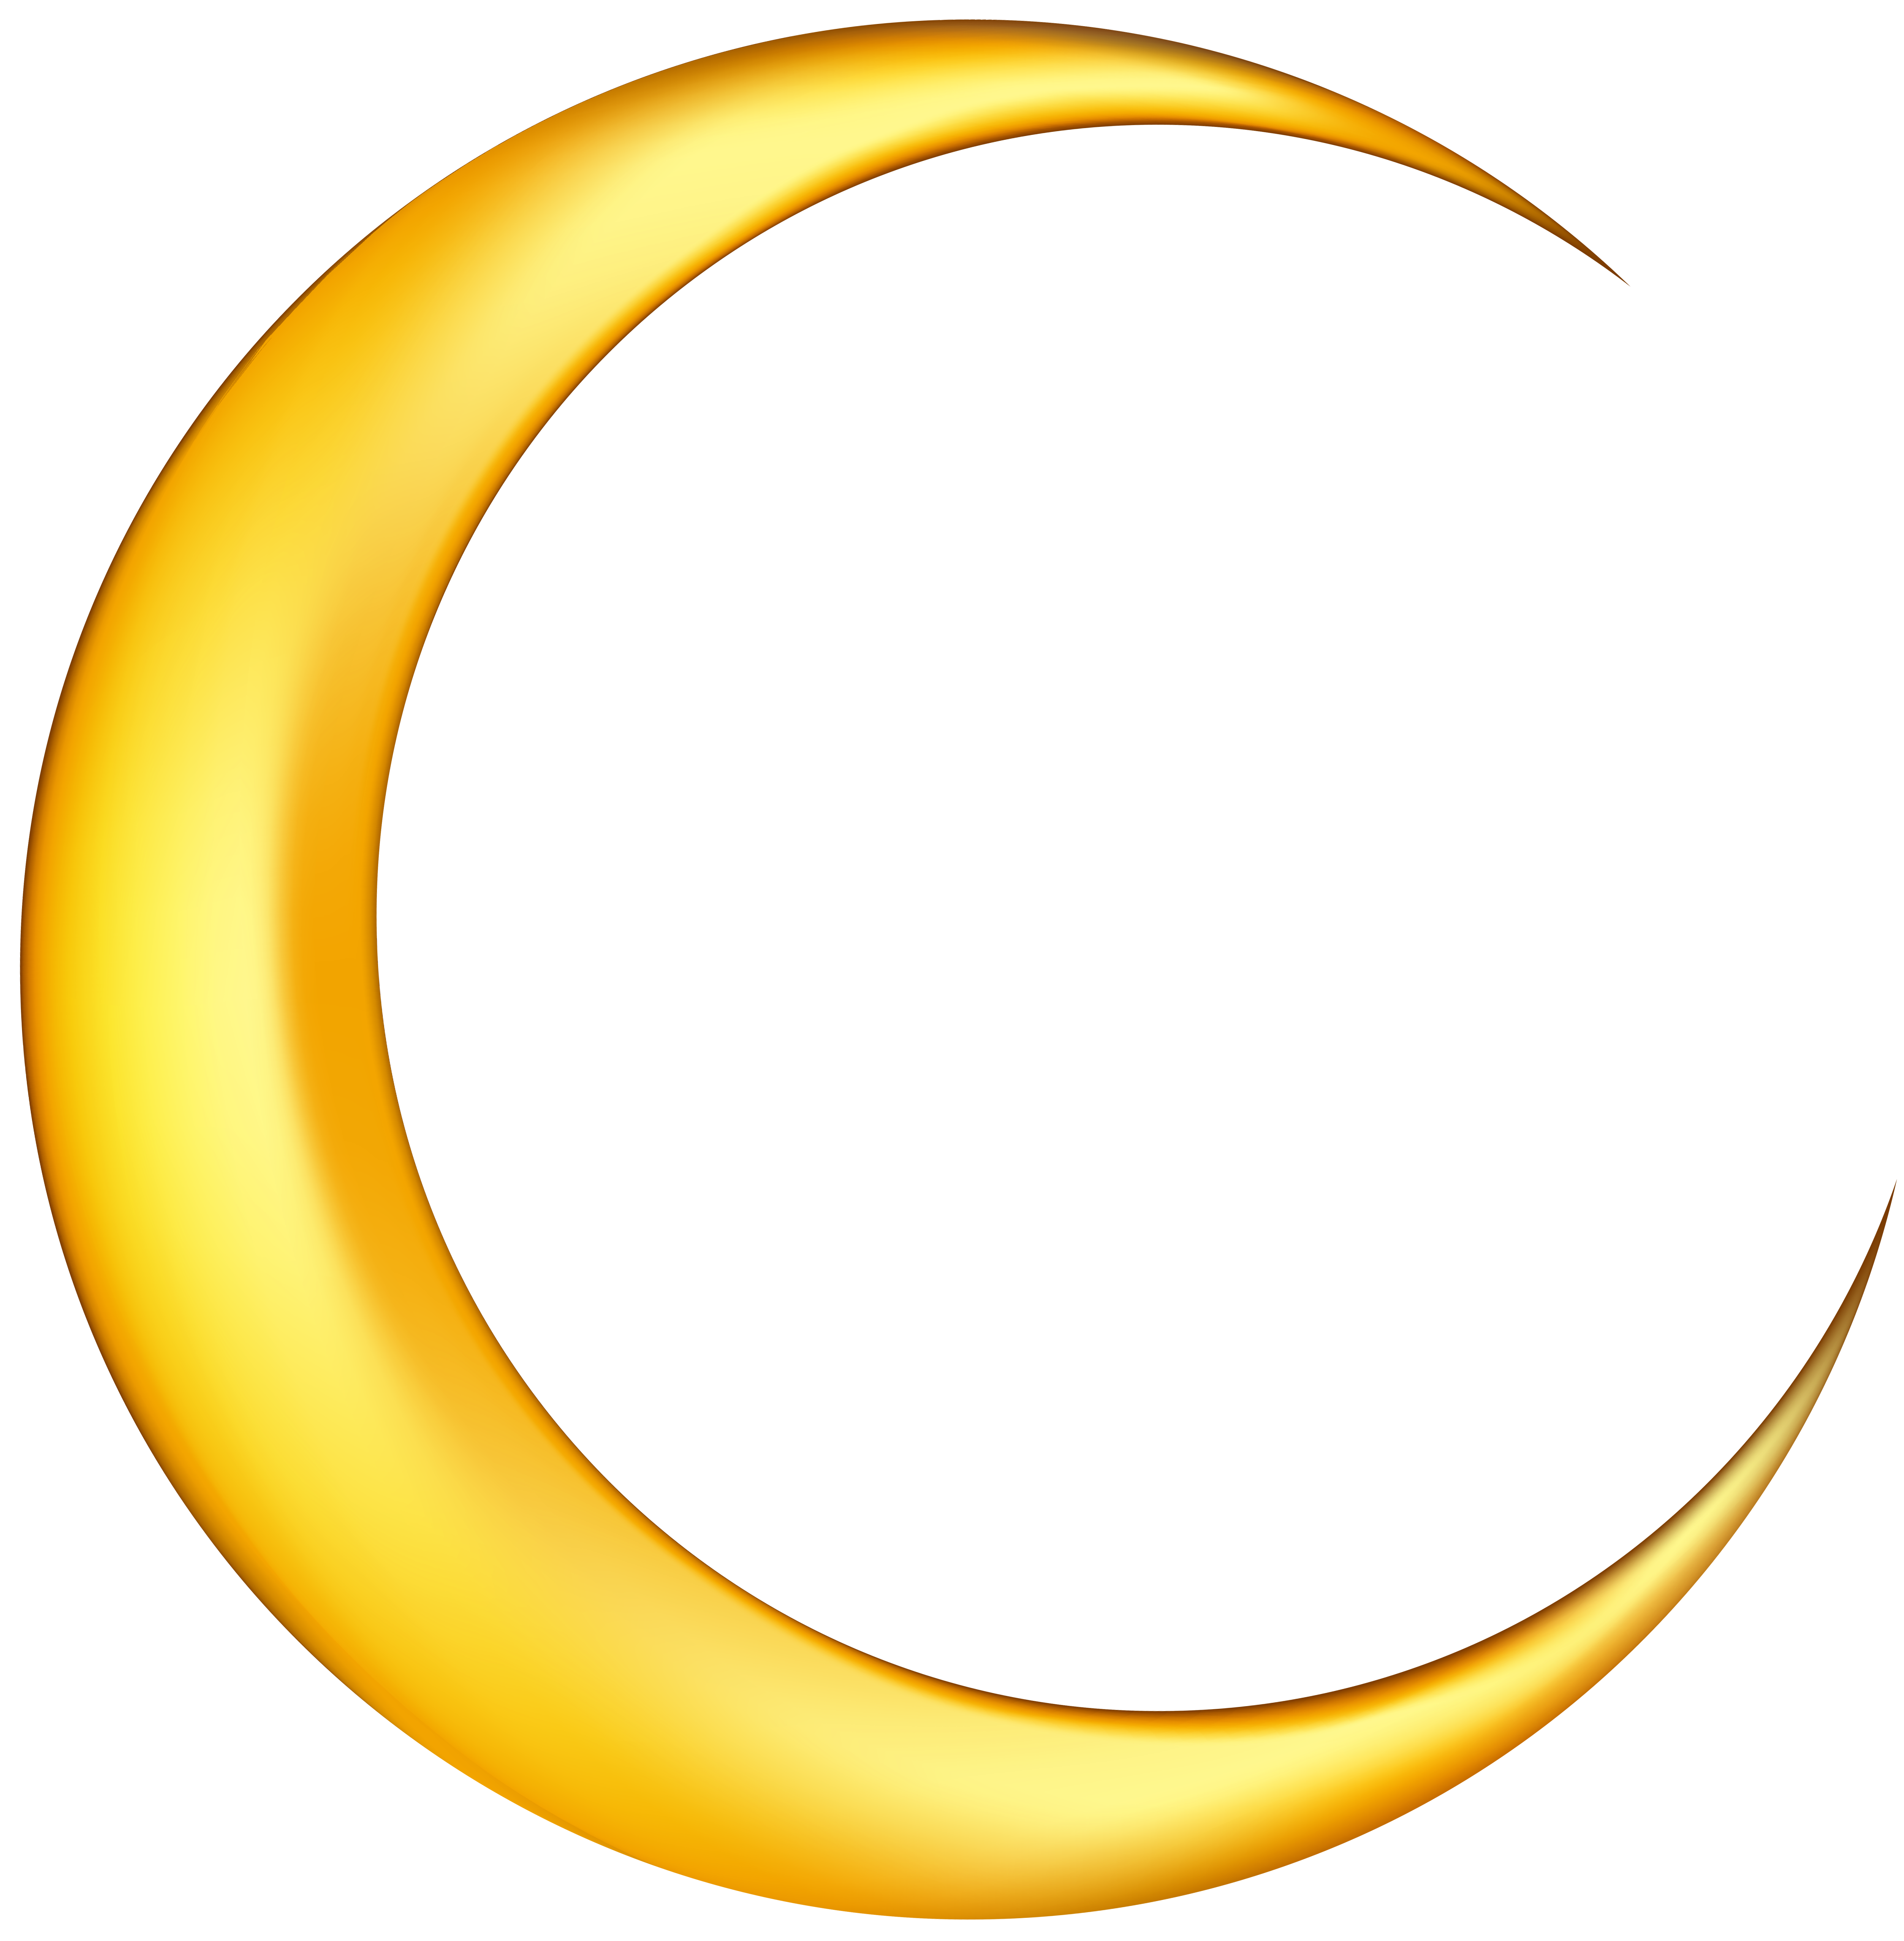 Reflection clipart moon. Yellow new png clip